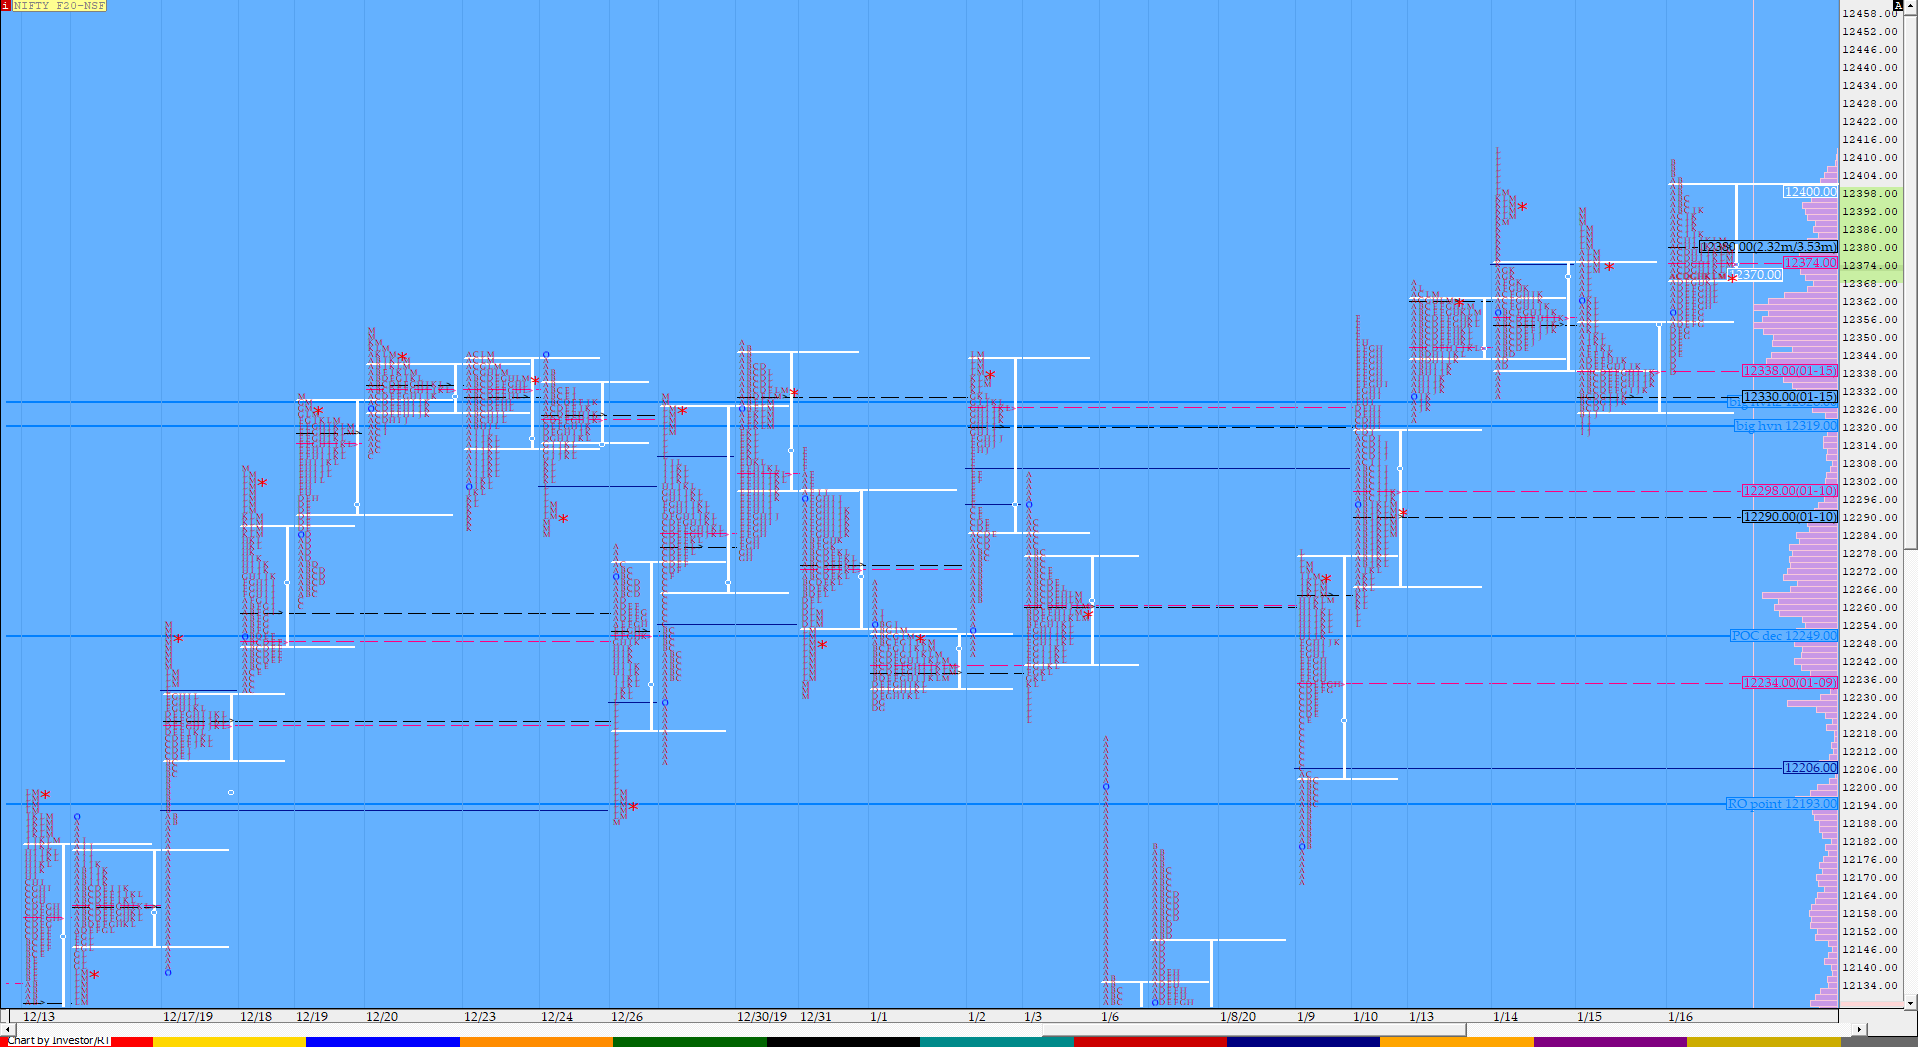 Nf Compo1 12 Market Profile Analysis Dated 16Th Jan 2020 Banknifty Futures, Charts, Day Trading, Intraday Trading, Intraday Trading Strategies, Market Profile, Market Profile Trading Strategies, Nifty Futures, Order Flow Analysis, Support And Resistance, Technical Analysis, Trading Strategies, Volume Profile Trading